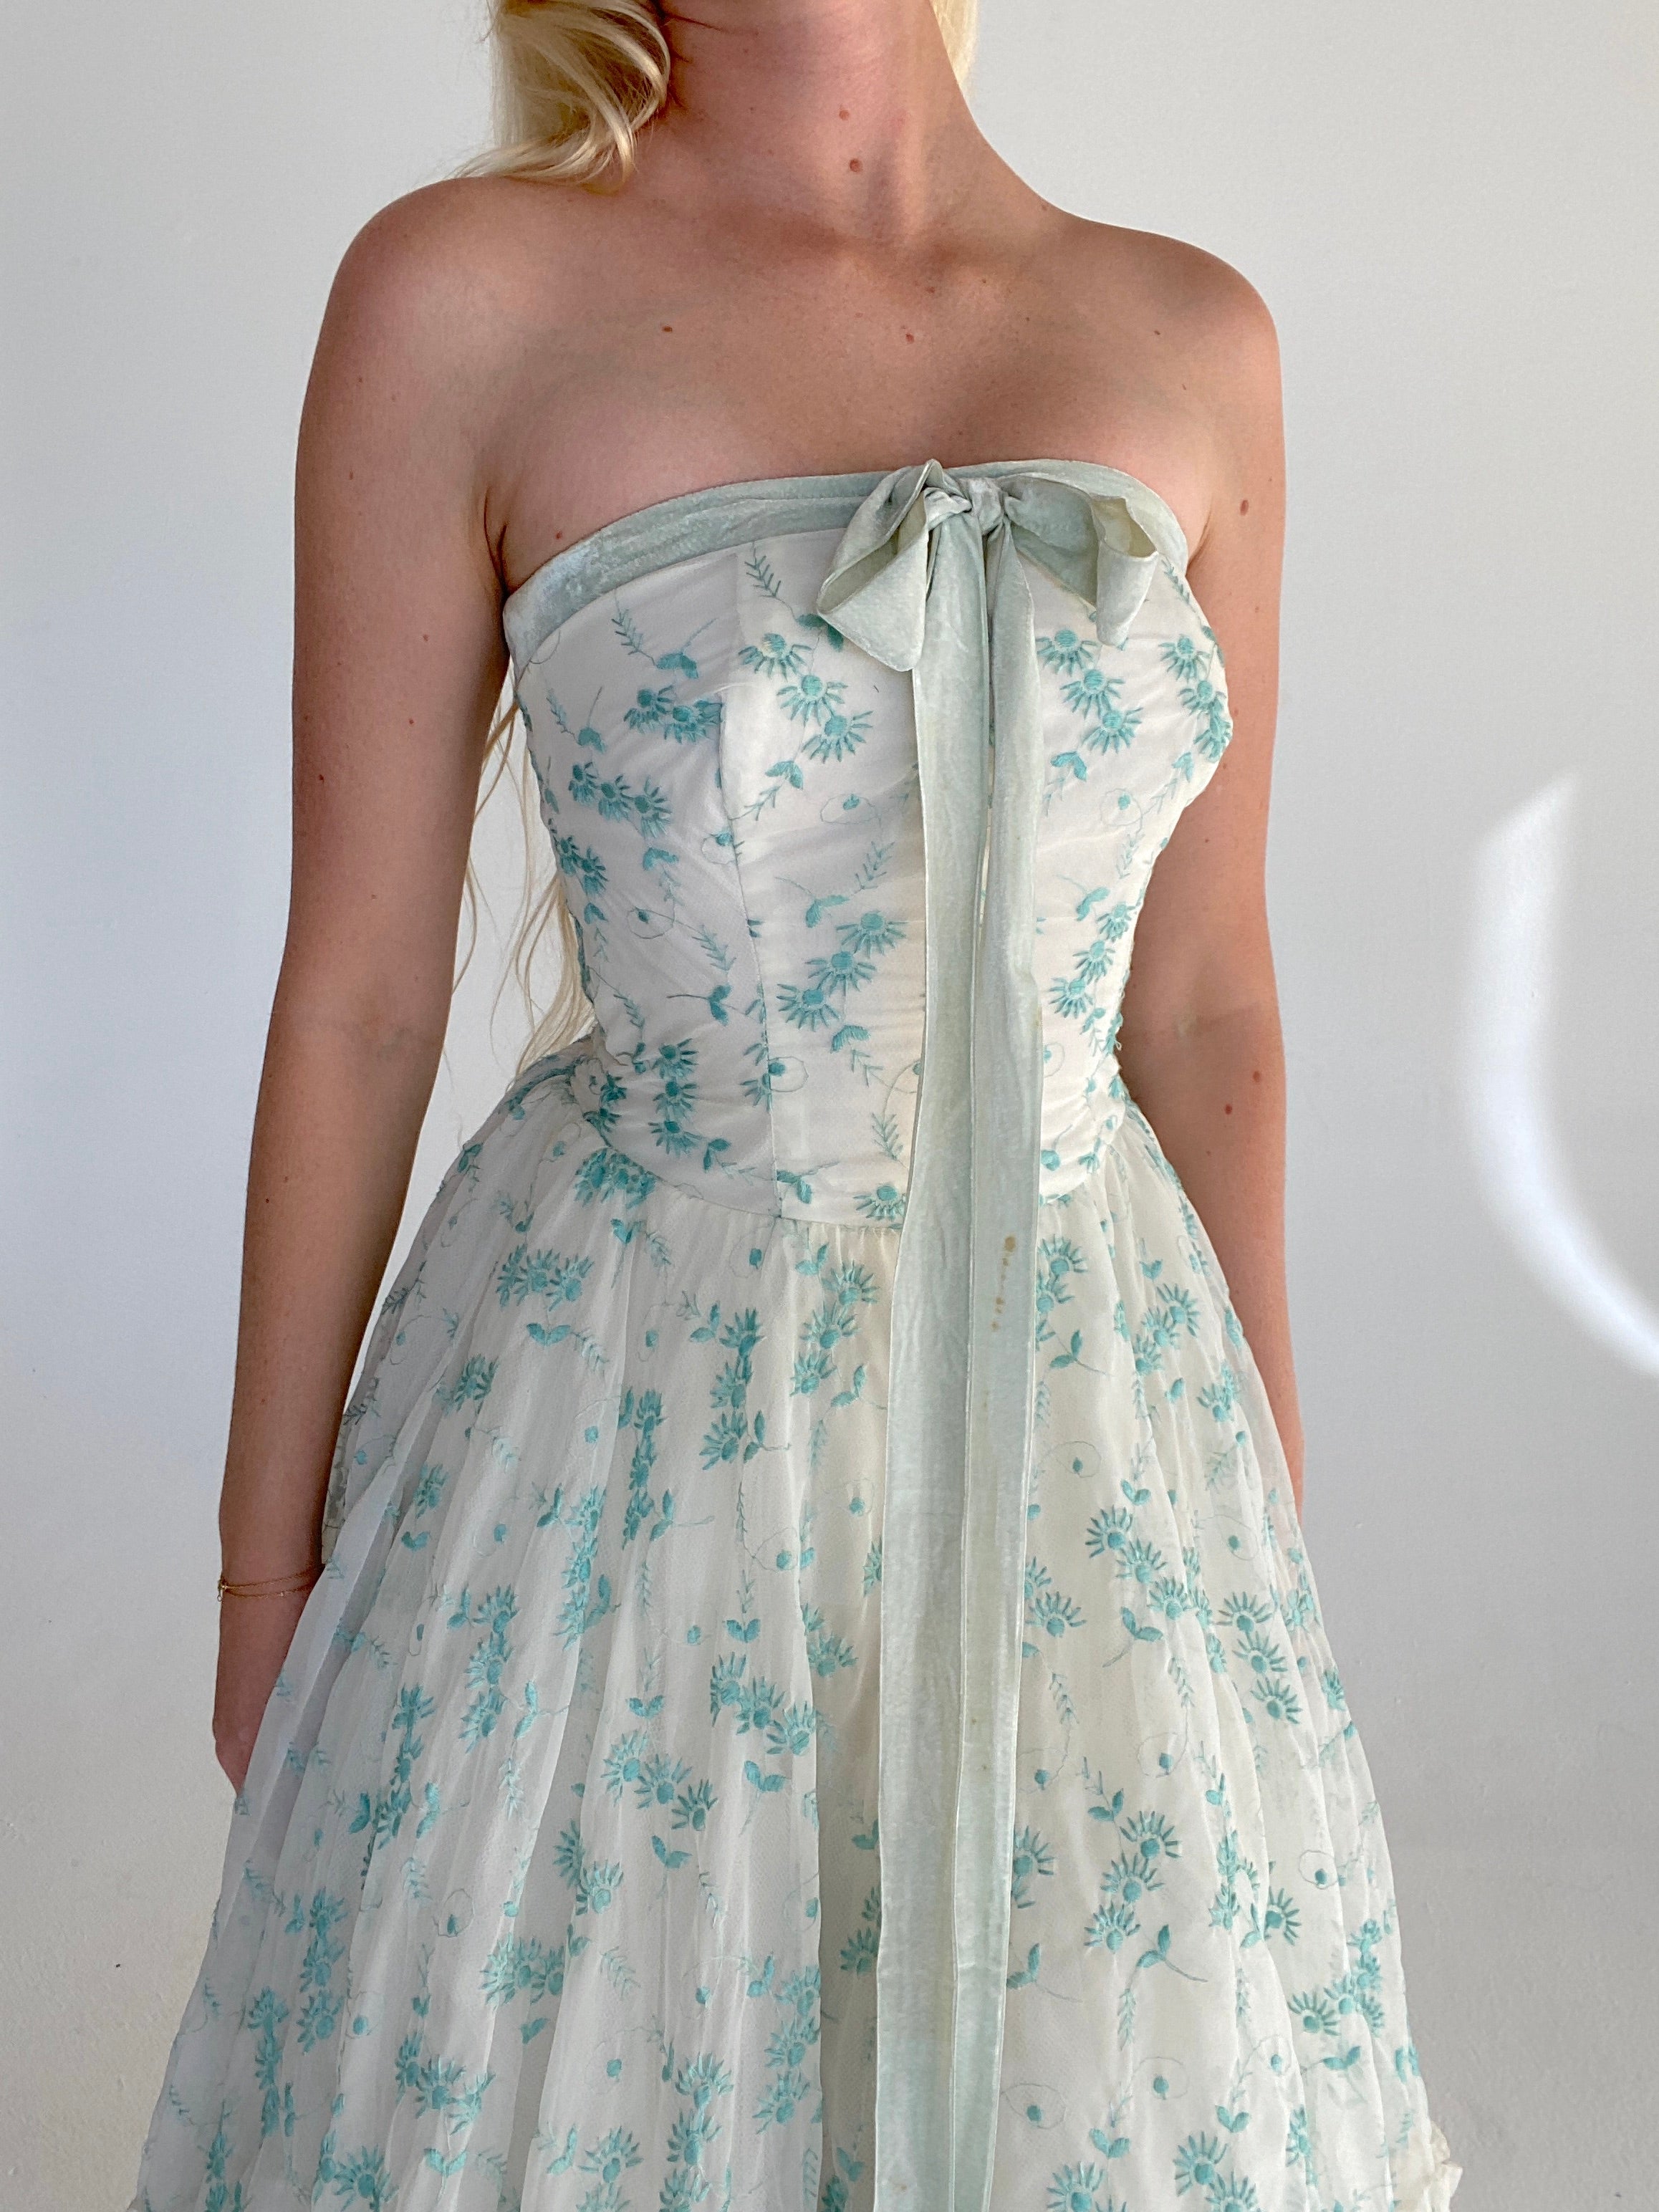 Strapless 1940's Embroidered Turquoise Floral Party Dress